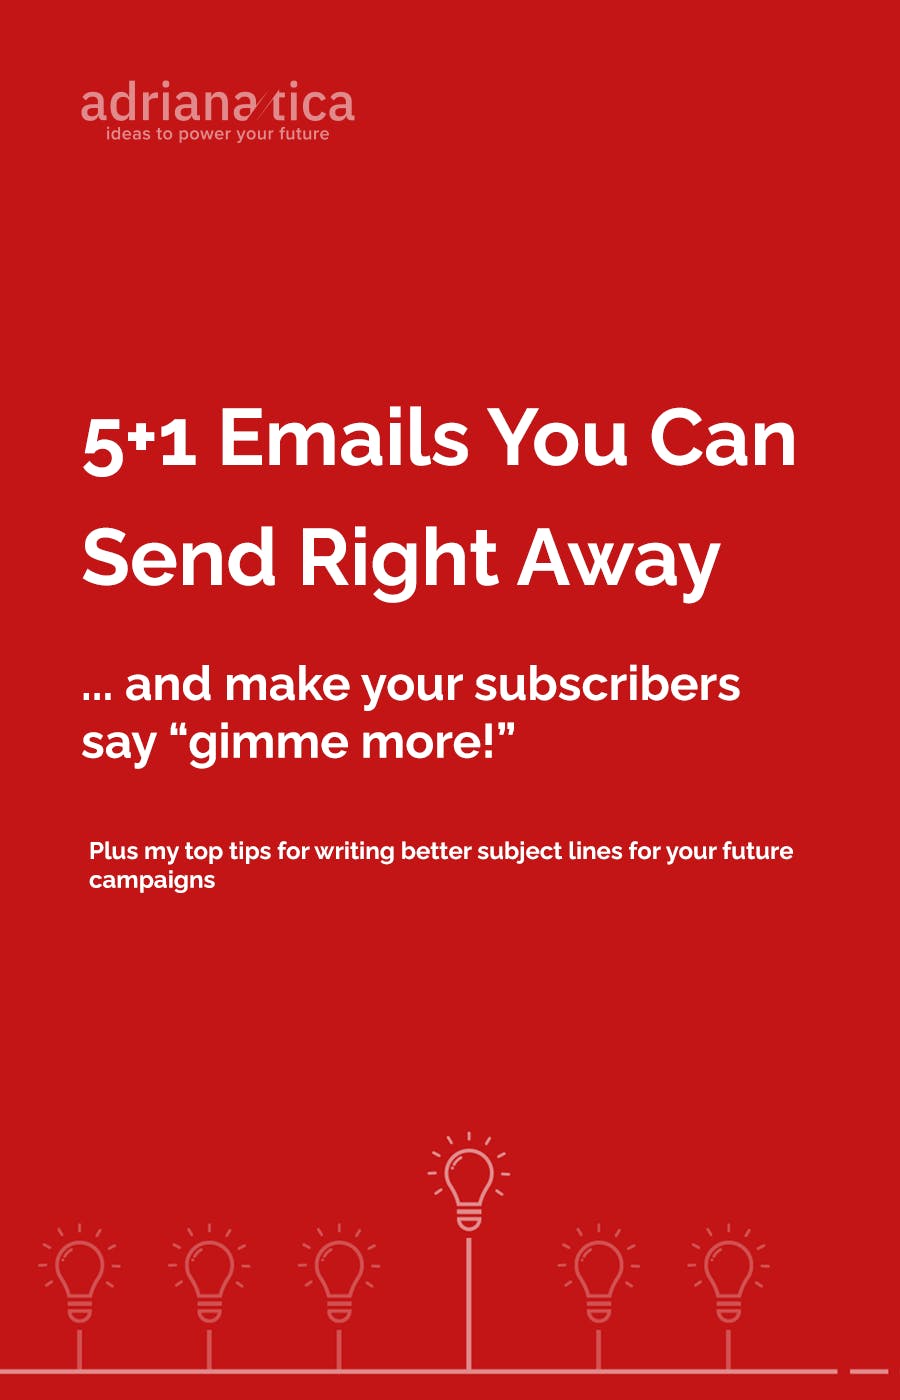 Your Turnkey Launch Email Sequence: 5+1 Emails You Can Send Right Now